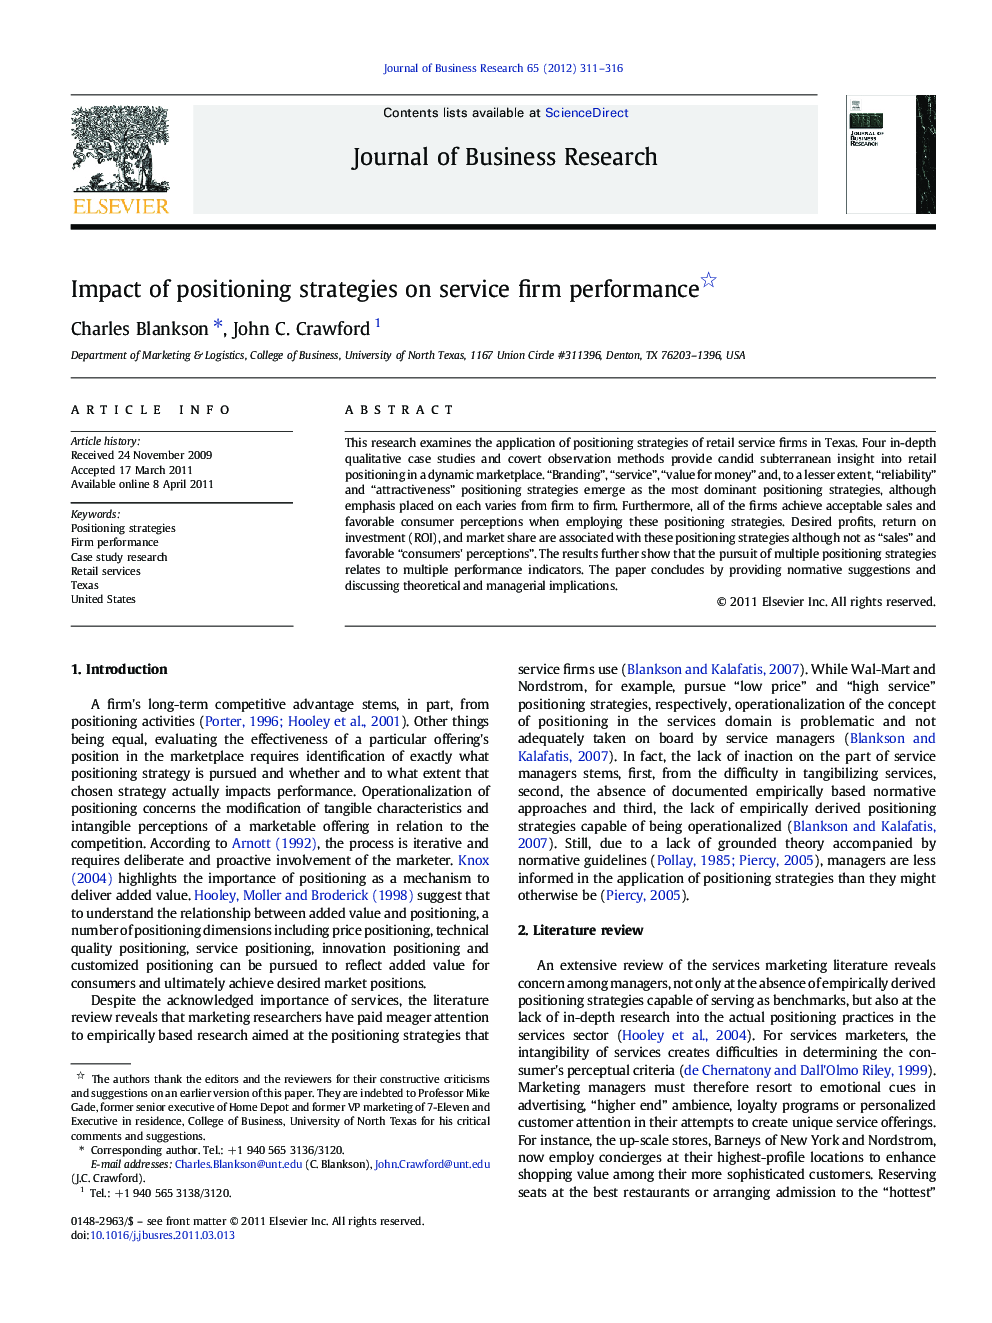 Impact of positioning strategies on service firm performance 